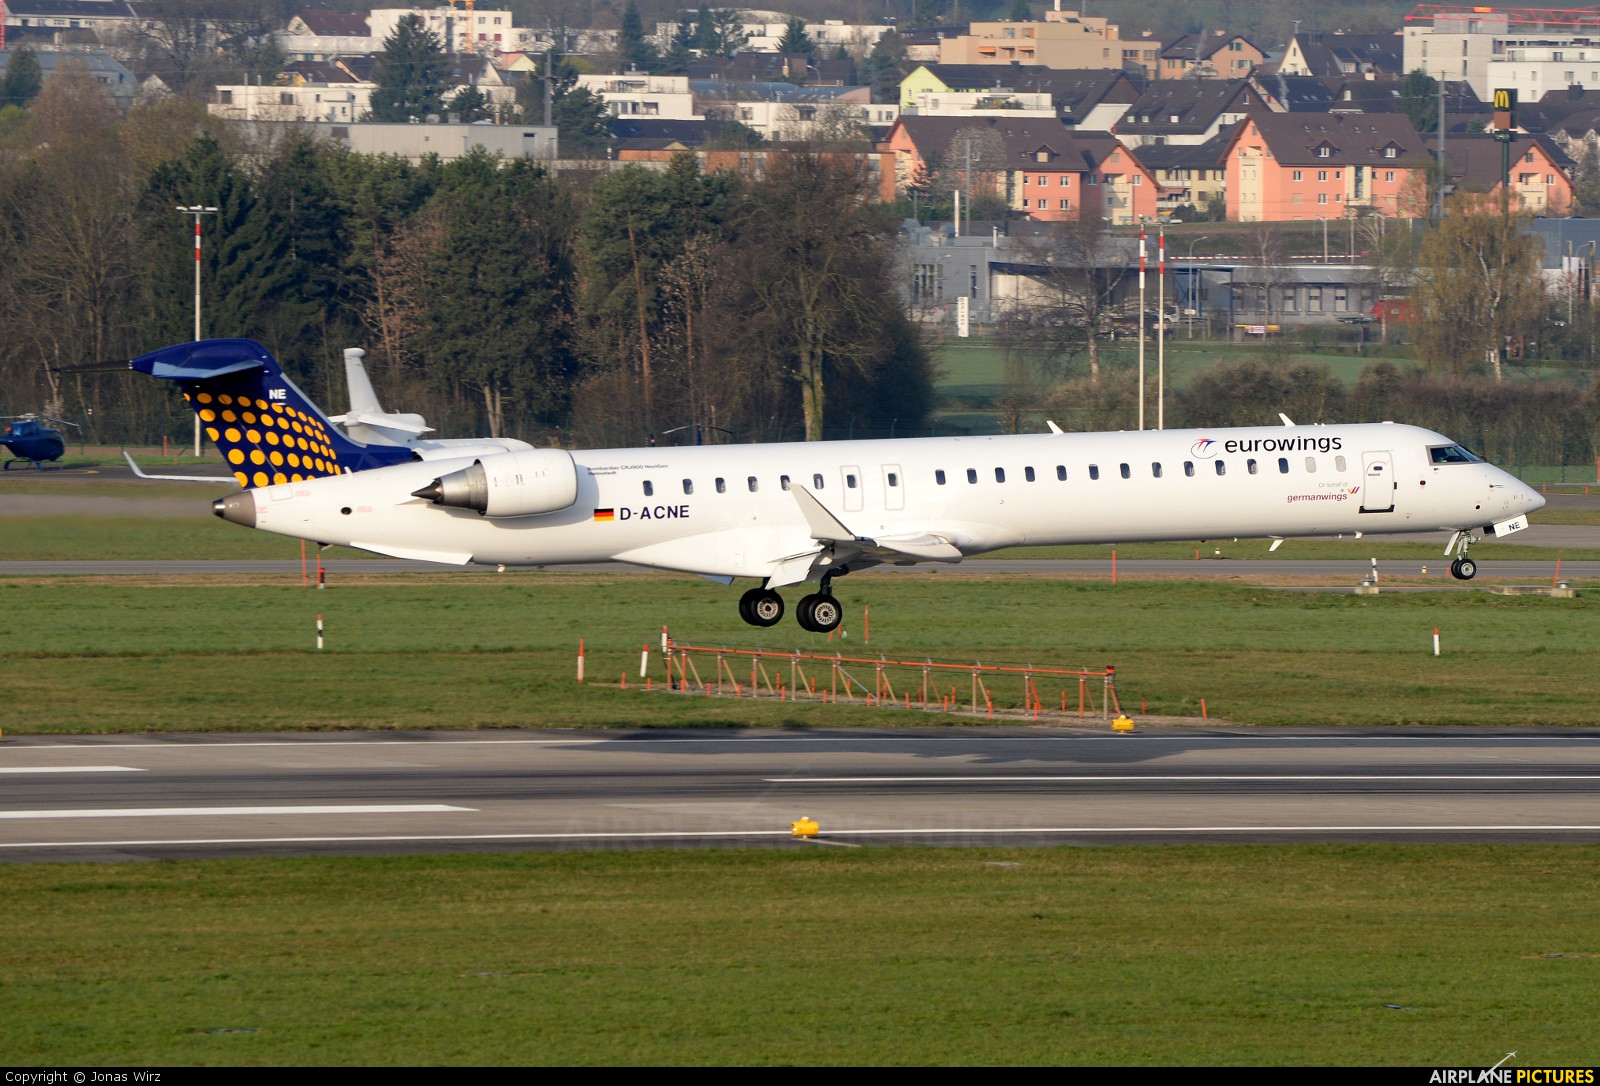 Eurowings D-ACNE aircraft at Zurich